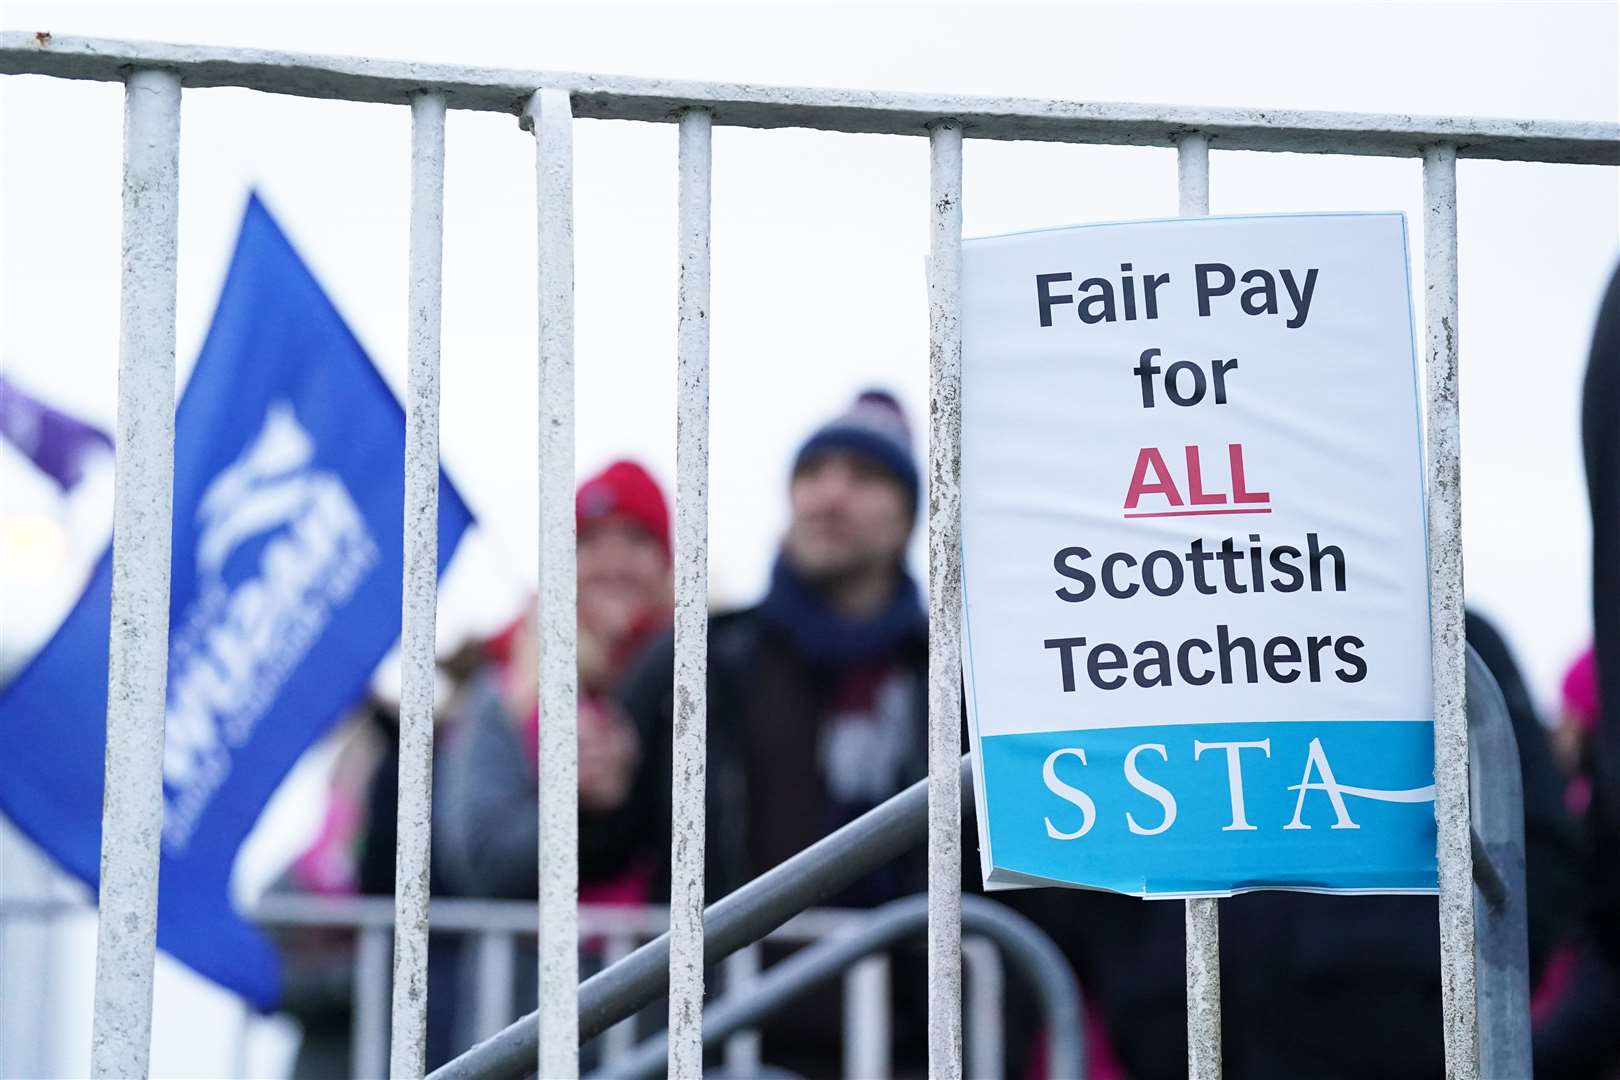 Members of the EIS and SSTA unions on the picket line at St Andrew’s and St Bride’s High School in South Lanarkshire (Andrew Milligan/PA)